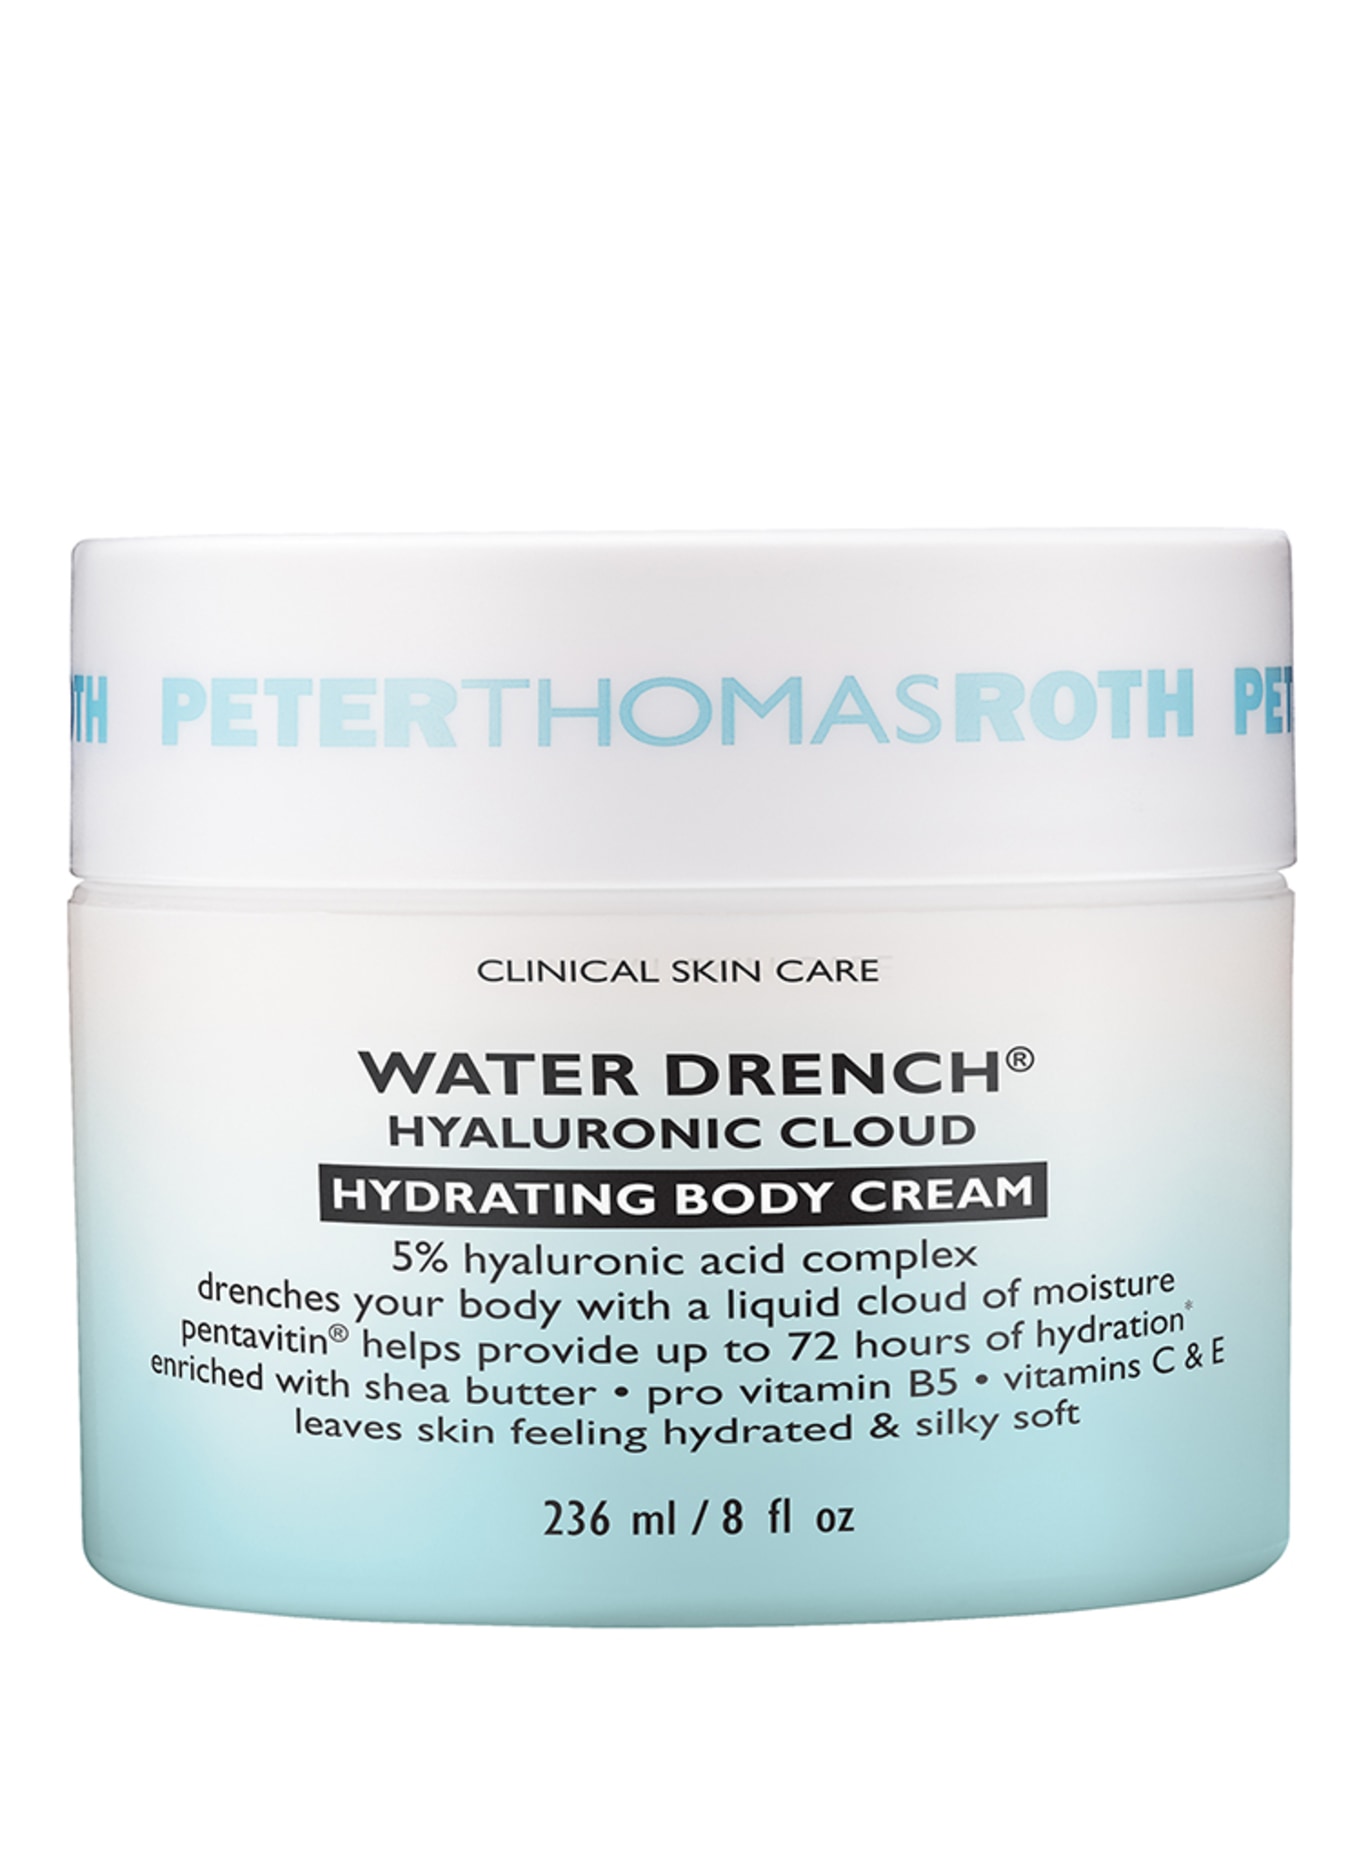 PETER THOMAS ROTH WATER DRENCH® HYALURONIC CLOUD (Obrazek 1)